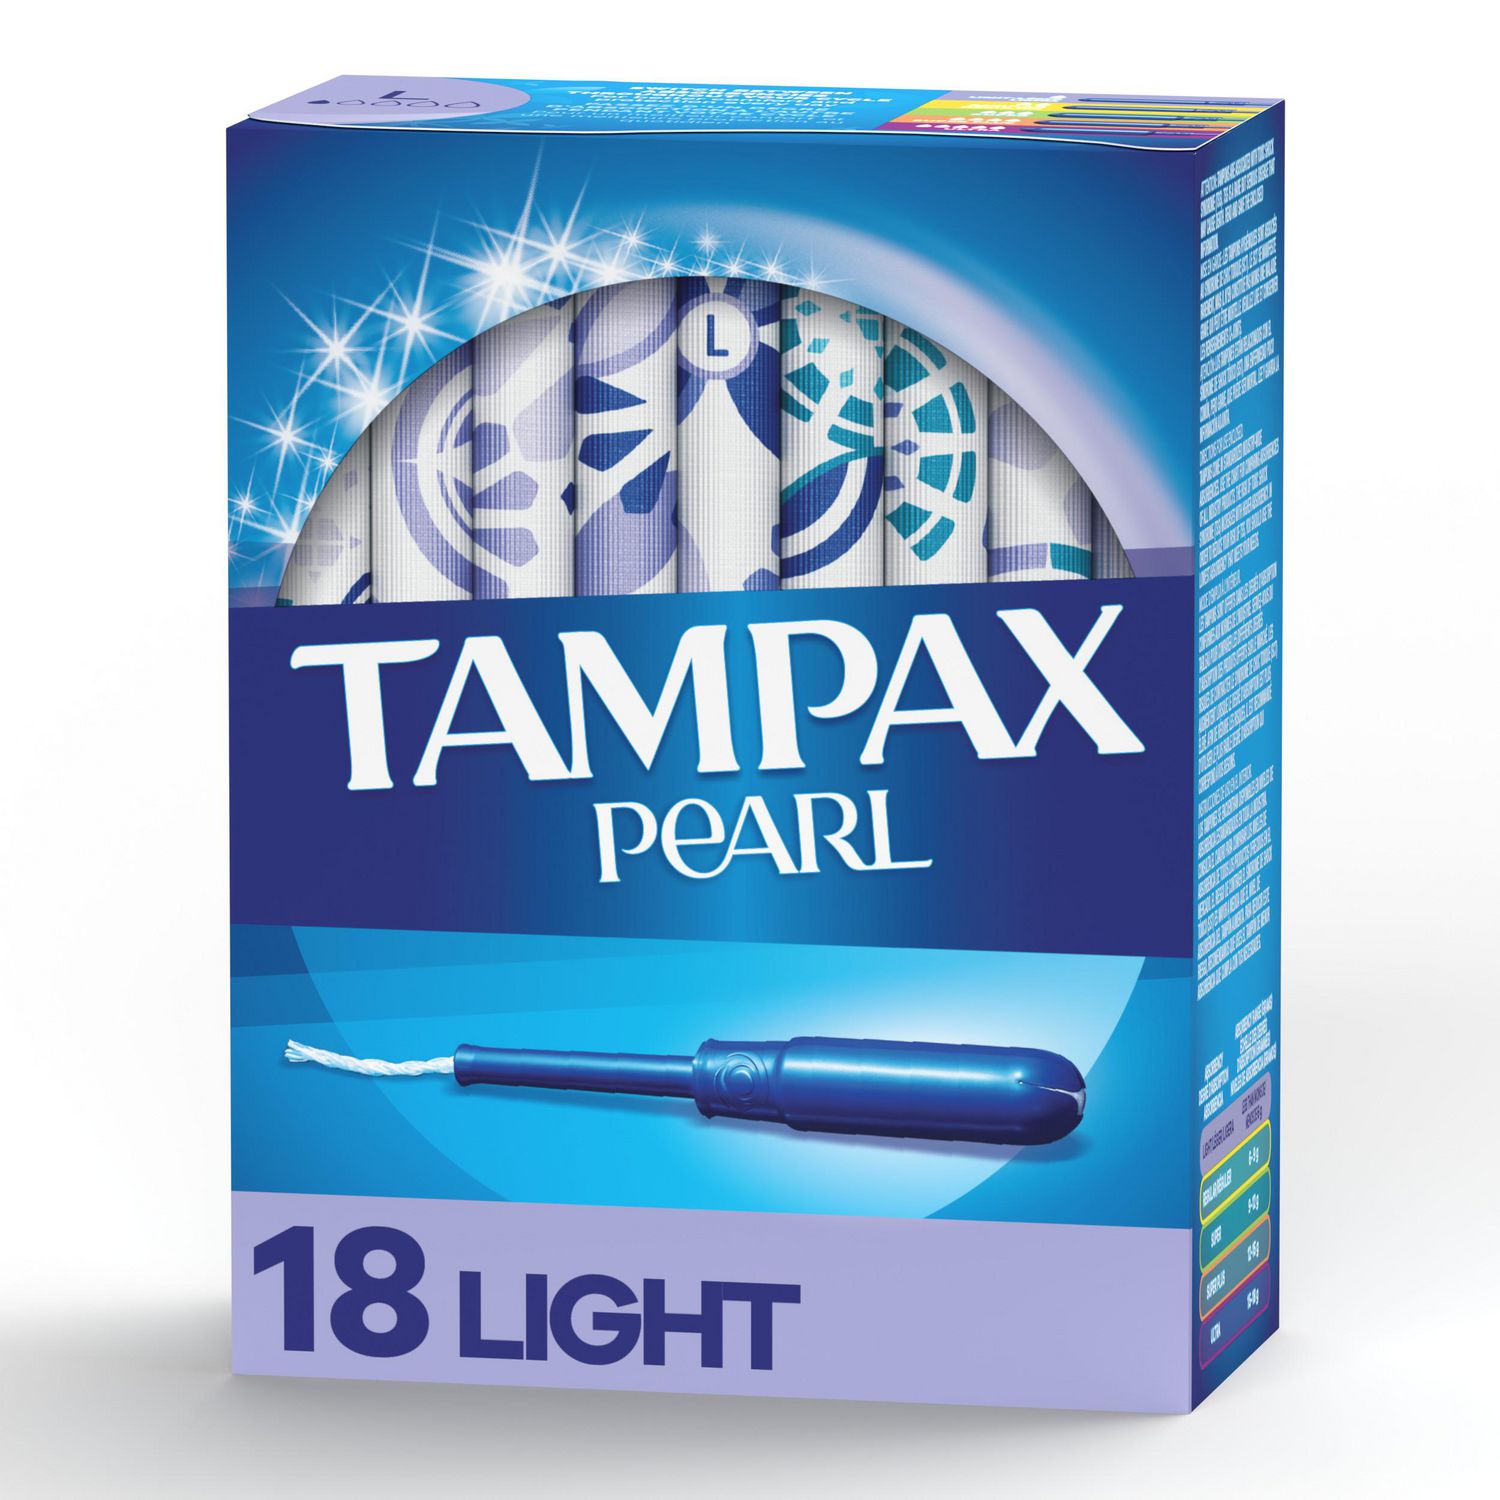 Tampax Pearl Tampons Light Absorbency with BPA-Free Plastic